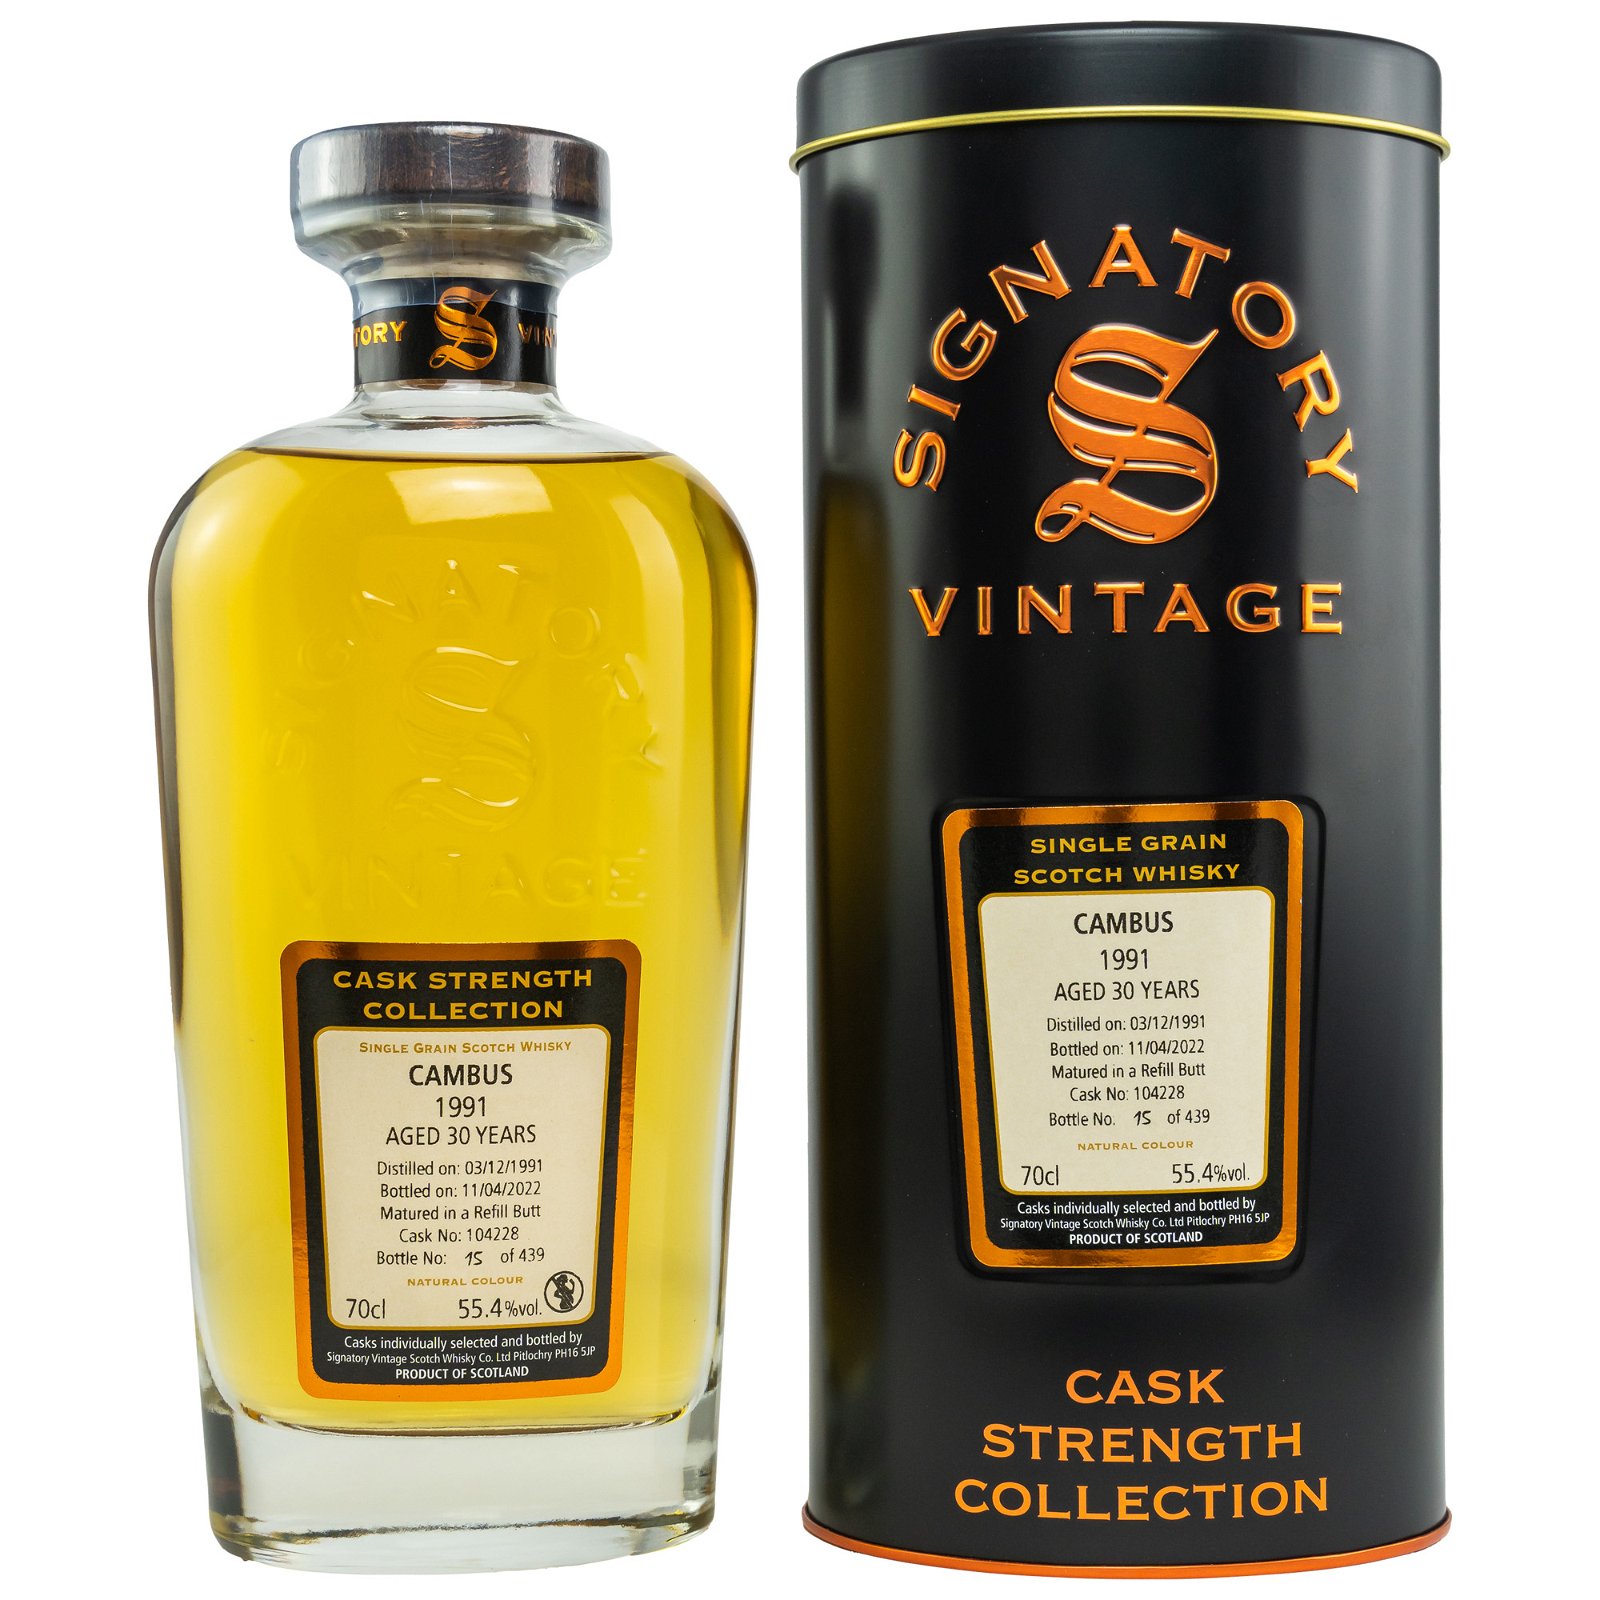 Cambus 1991/2022 - 30 Jahre Refill Butt No. 104228 Cask Strength Collection (Signatory)